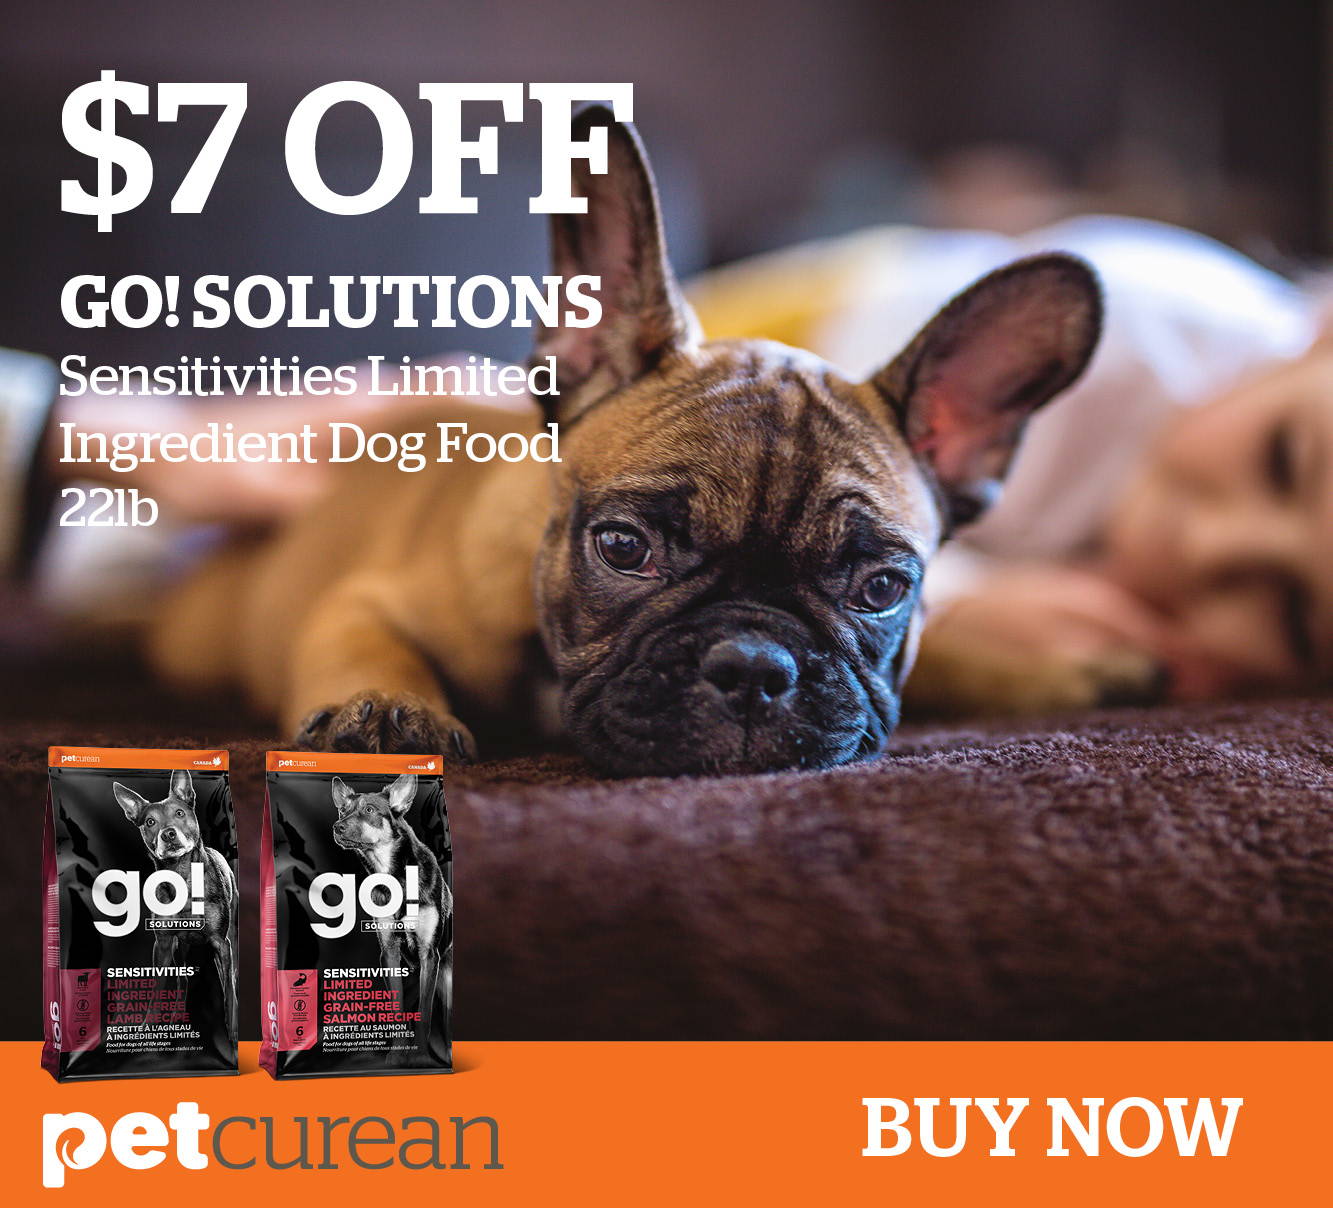 $7 off Go! Solutions Sensitivities Limited Ingredient Dog Food 22lb